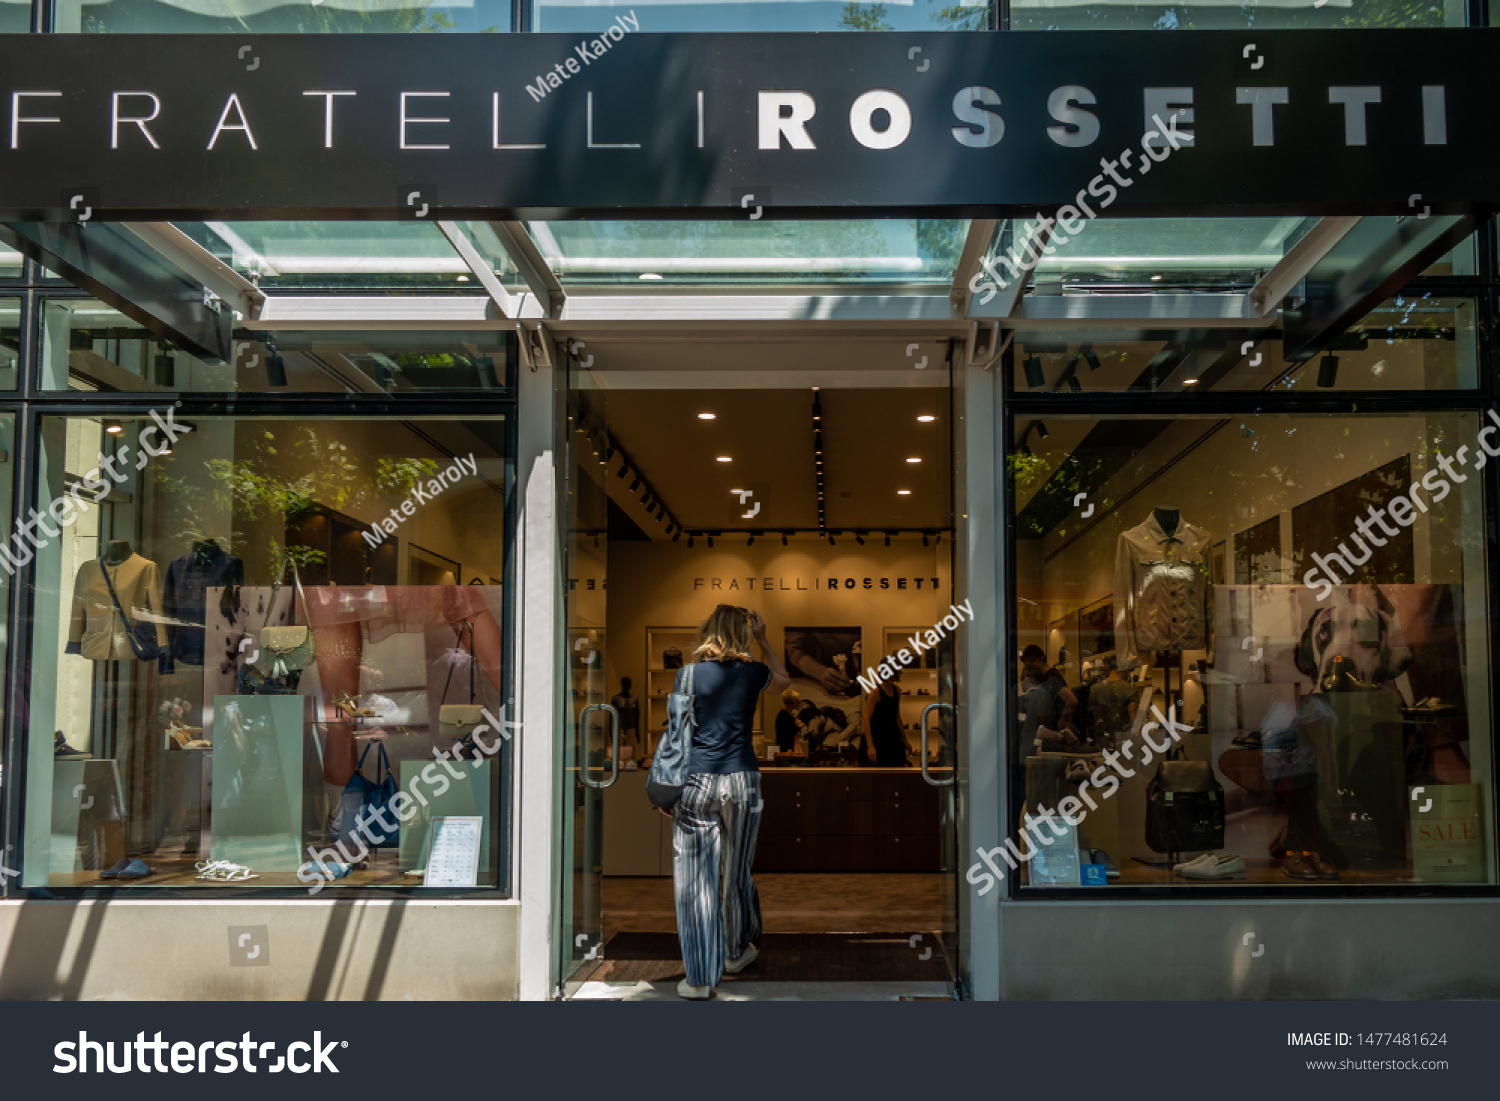 fratelli rossetti outlet